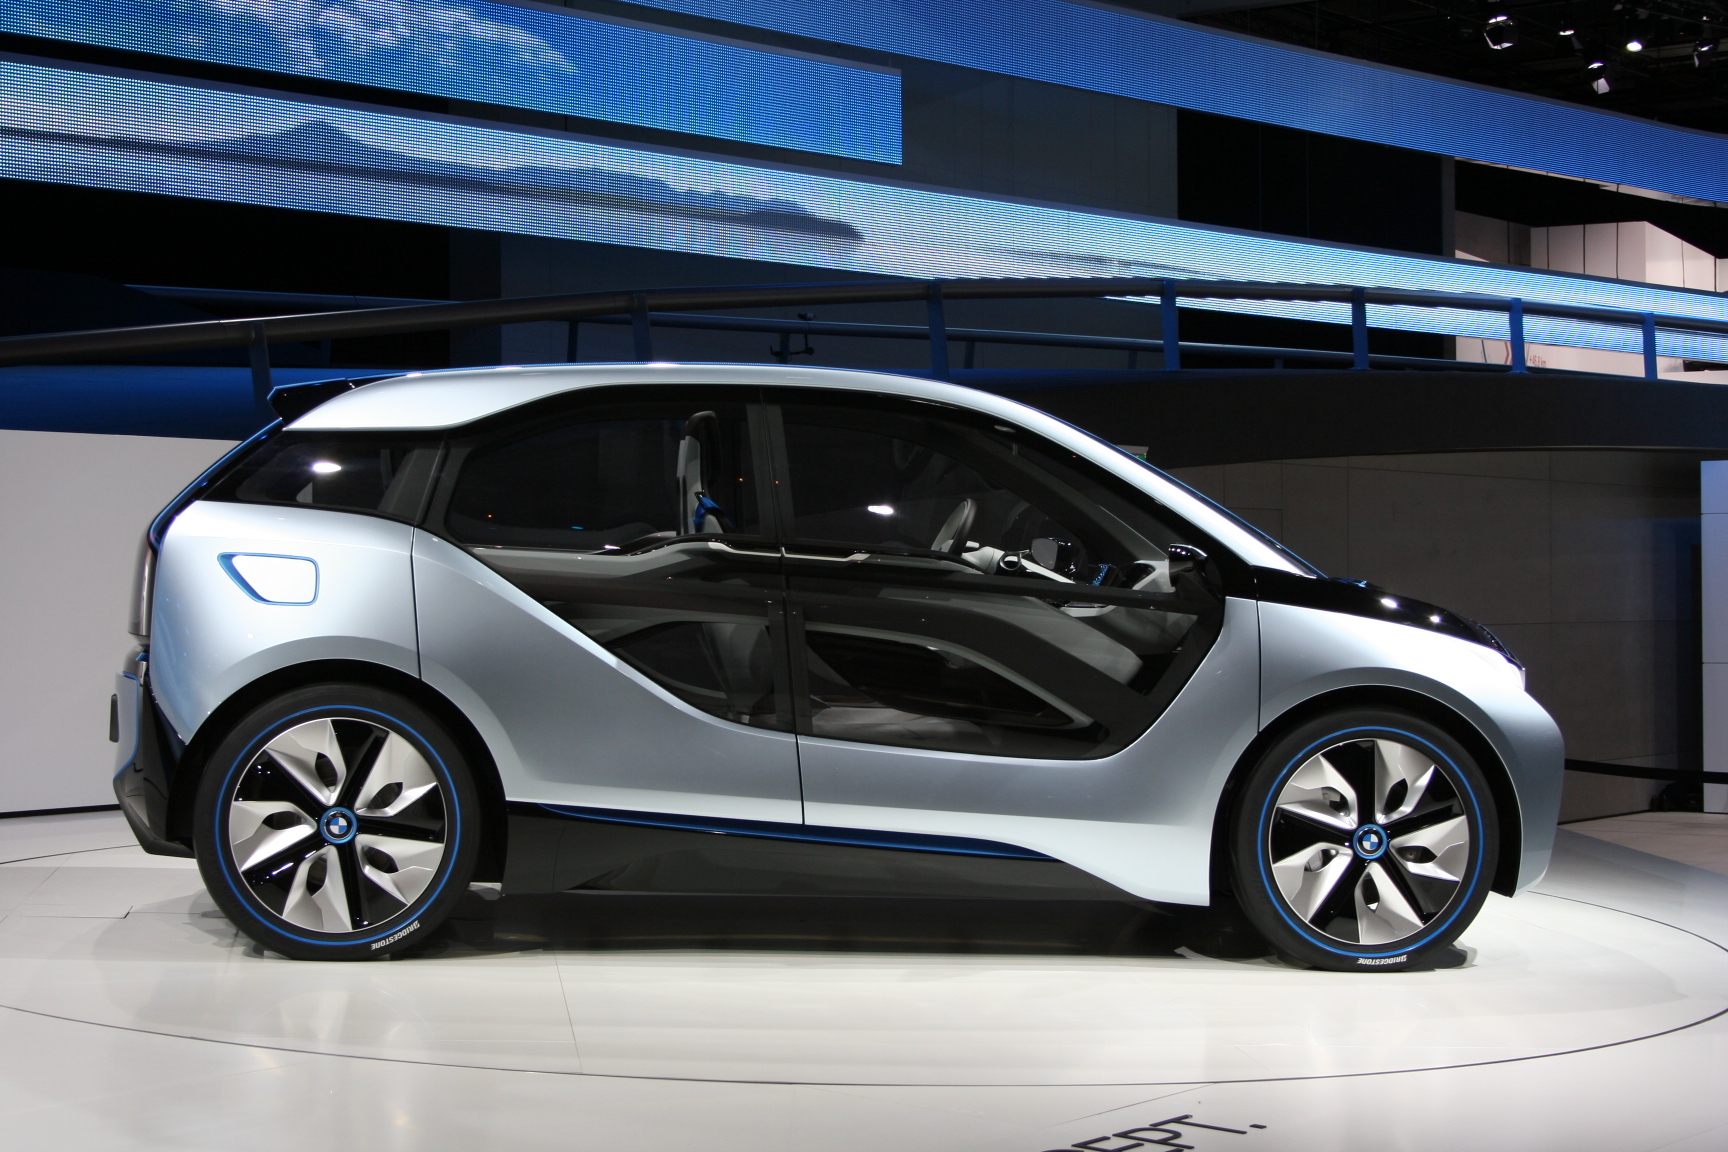 Nice Images Collection: BMW I3 Concept Desktop Wallpapers